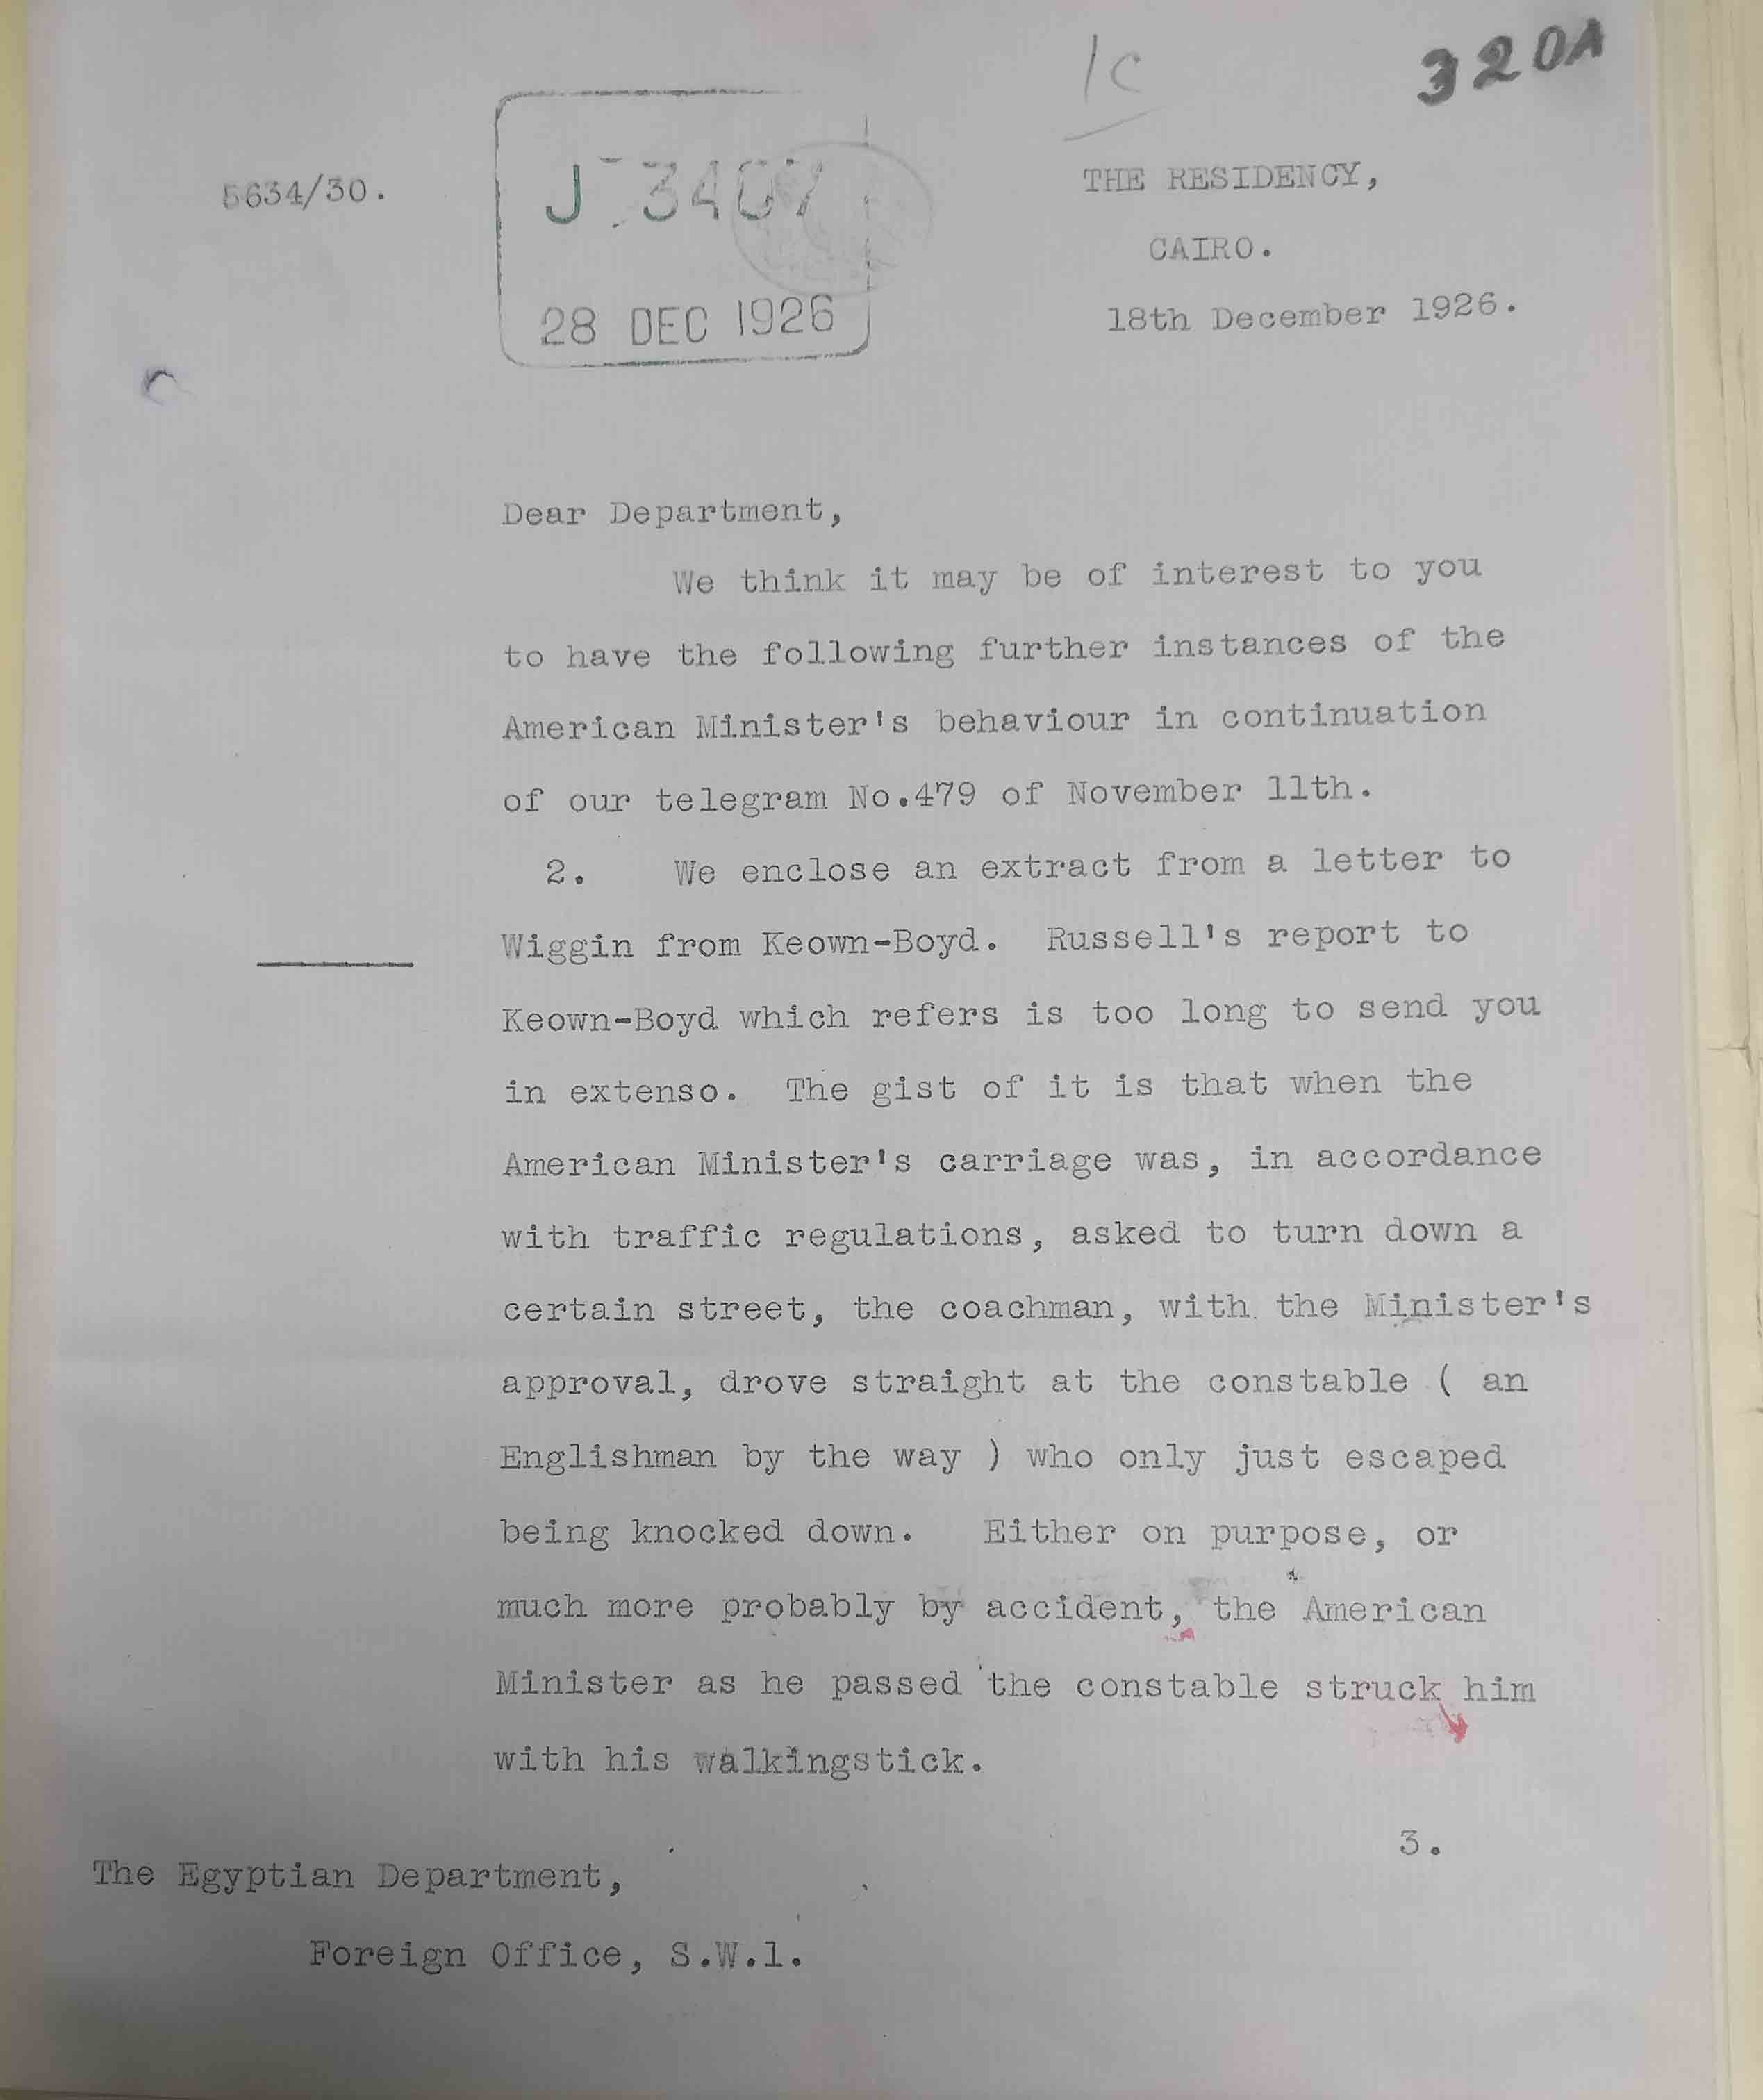 A letter from George Lloyd to the Foreign Office dated18 December 1926 (catalogue reference: FO 371/11608).